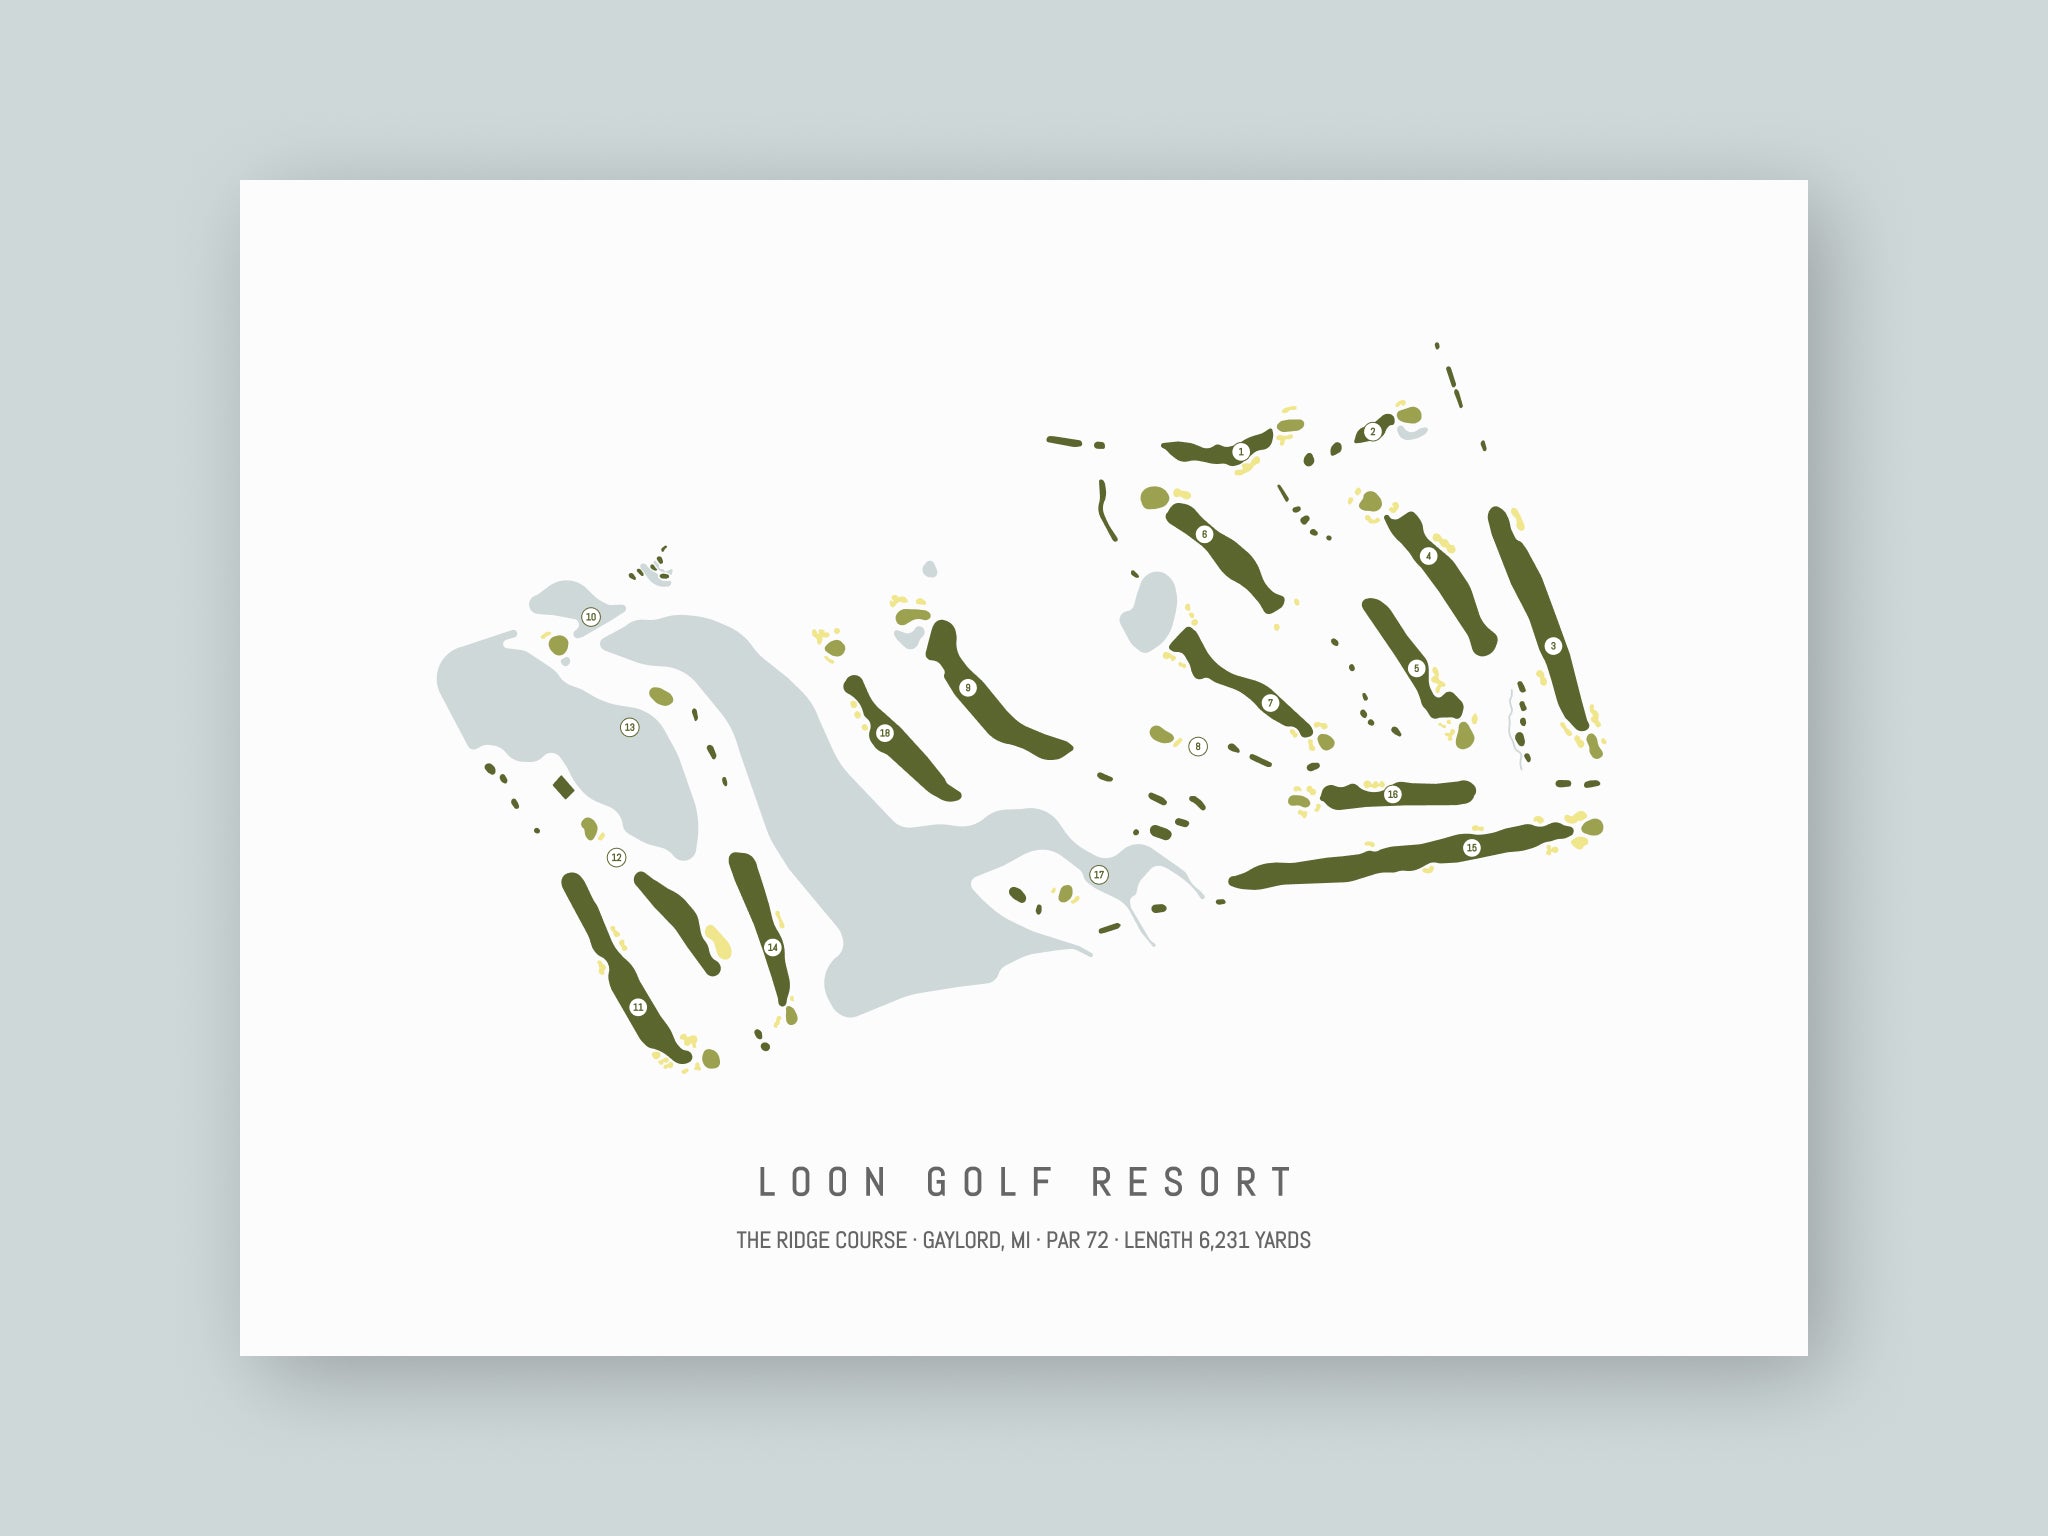 Loon-Golf-Resort-The-Ridge-Course-MI--Unframed-24x18-With-Hole-Numbers